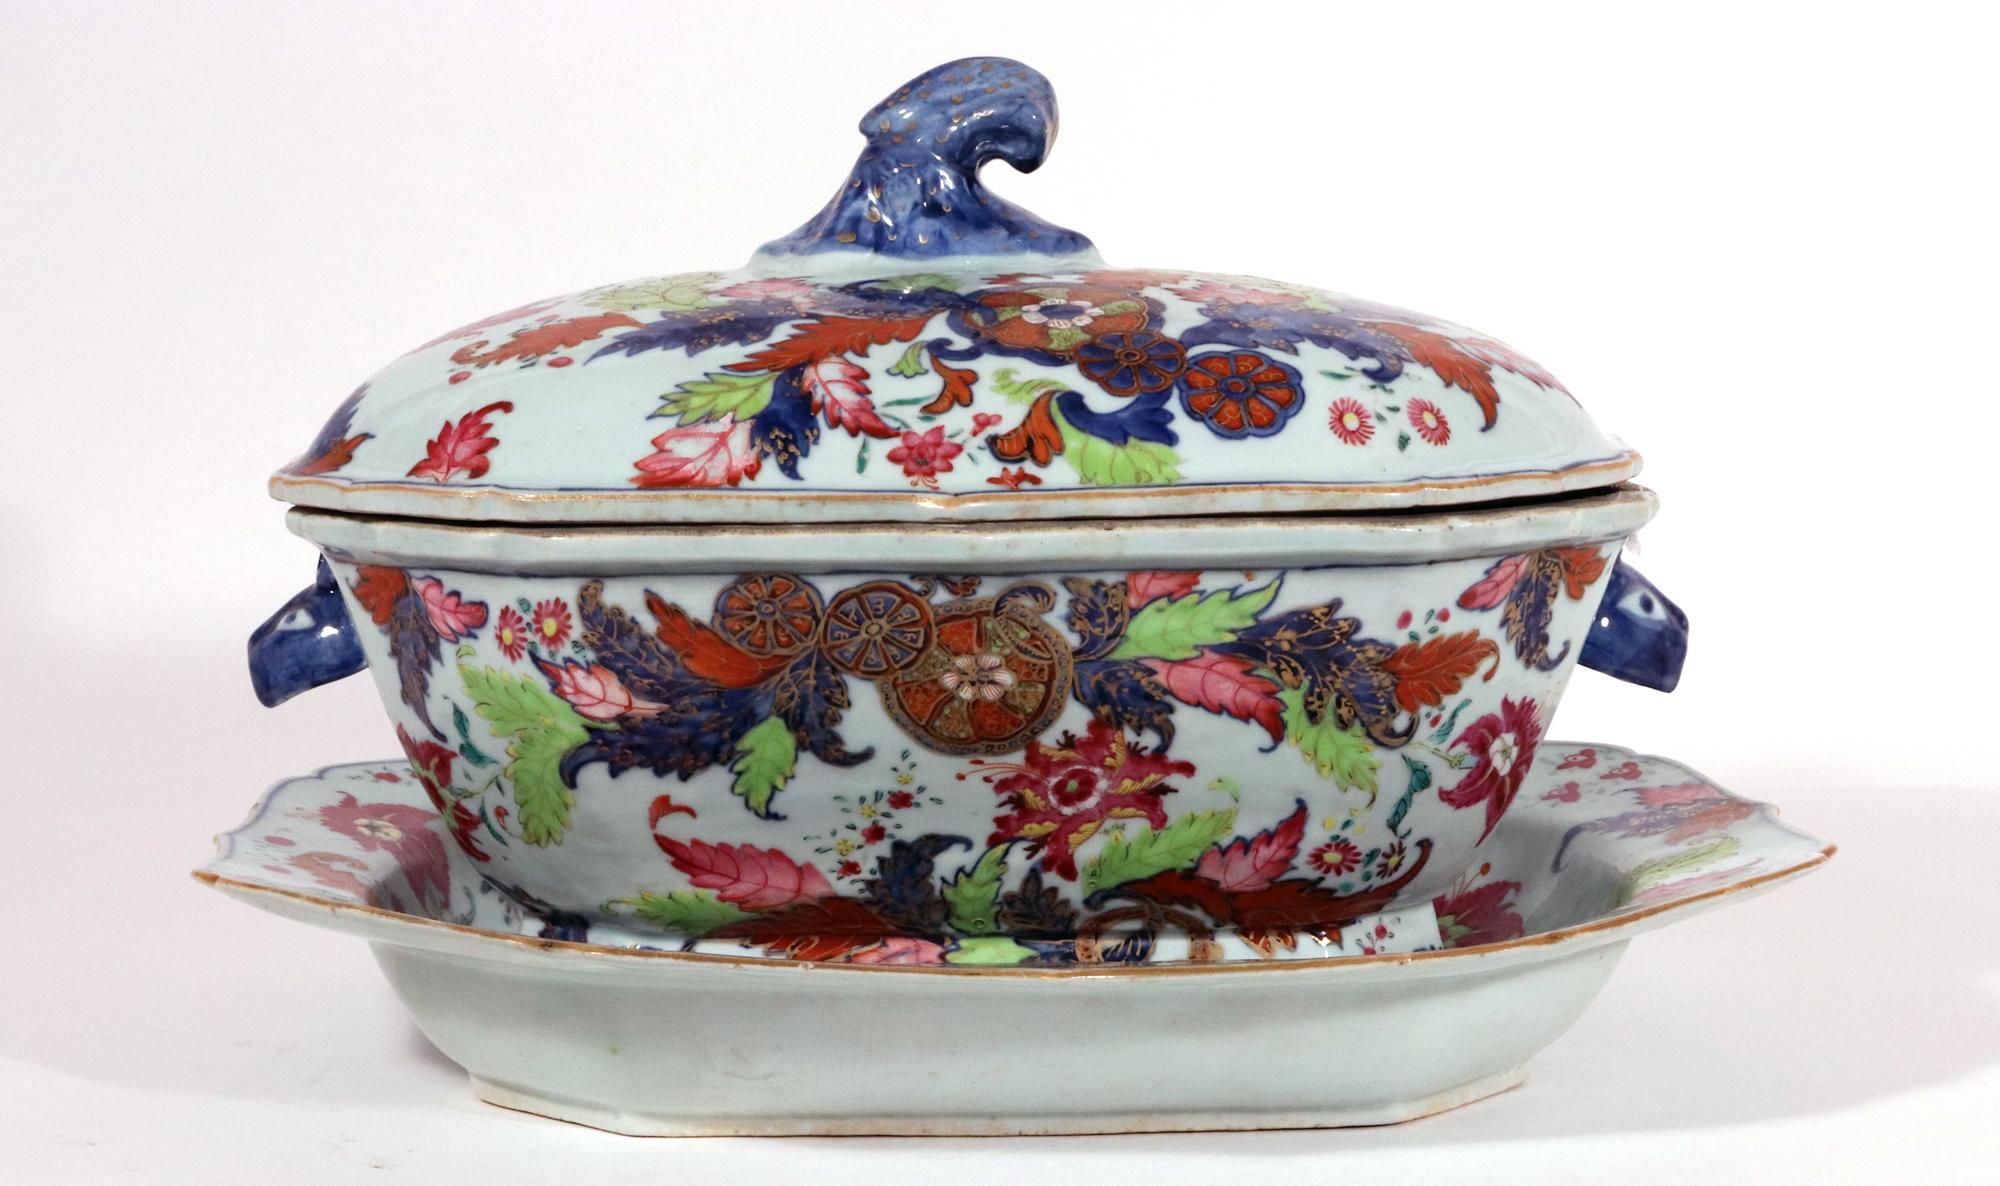 Chinese Export Porcelain Pseudo Tobacco Leaf Soup Tureen, Cover, and Stand 1